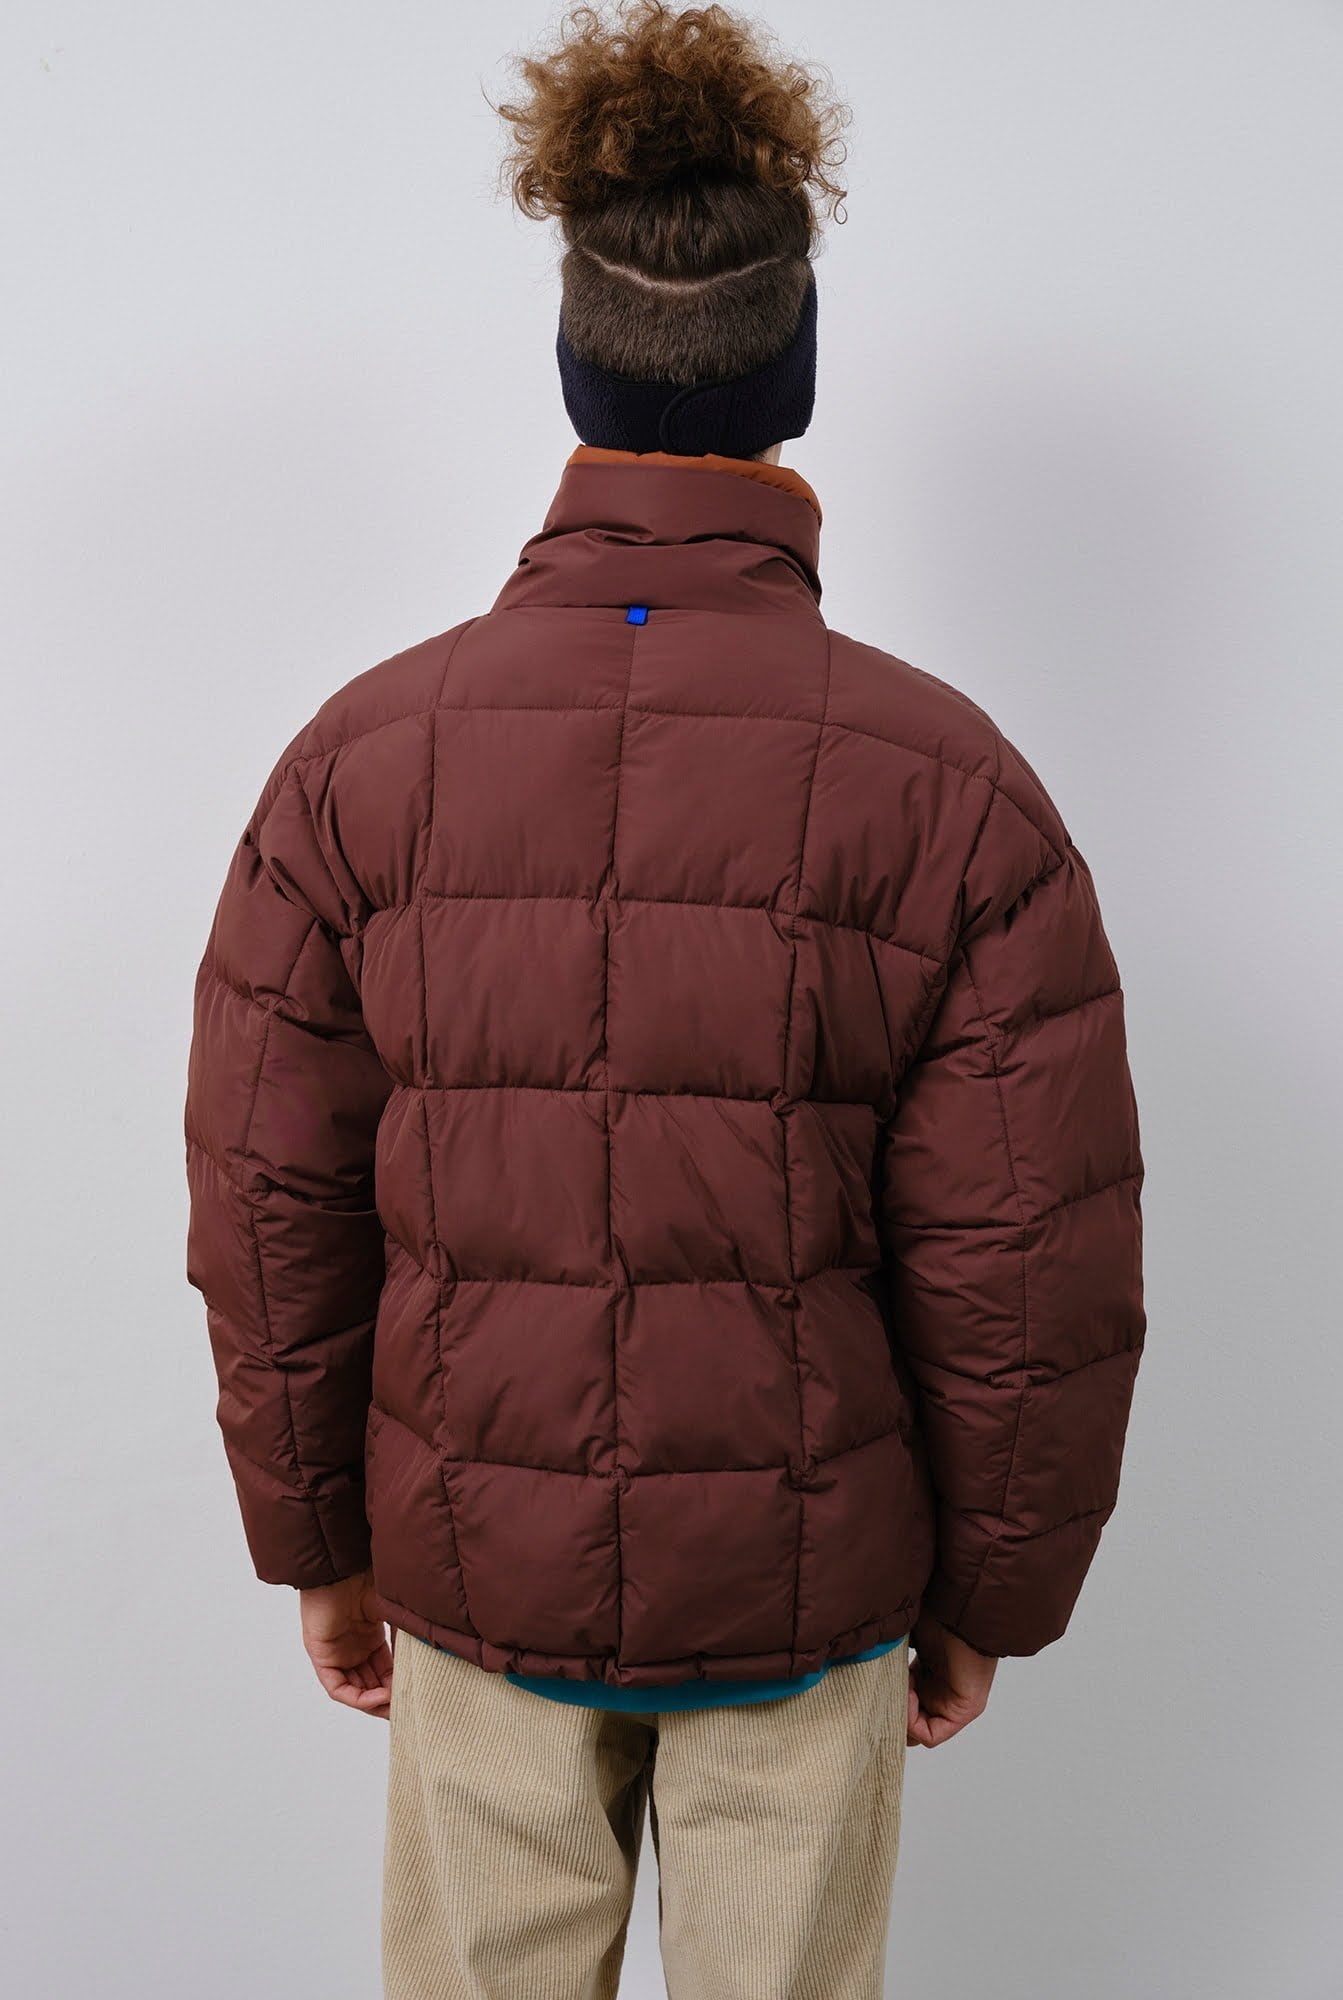 Embassy-of-Bricks-and-Logs-OUTLET-SALE-CAWSTON-PUFFER-JACKET-Jacken-Mantel-ARCHIVE-COLLECTION-4.jpg